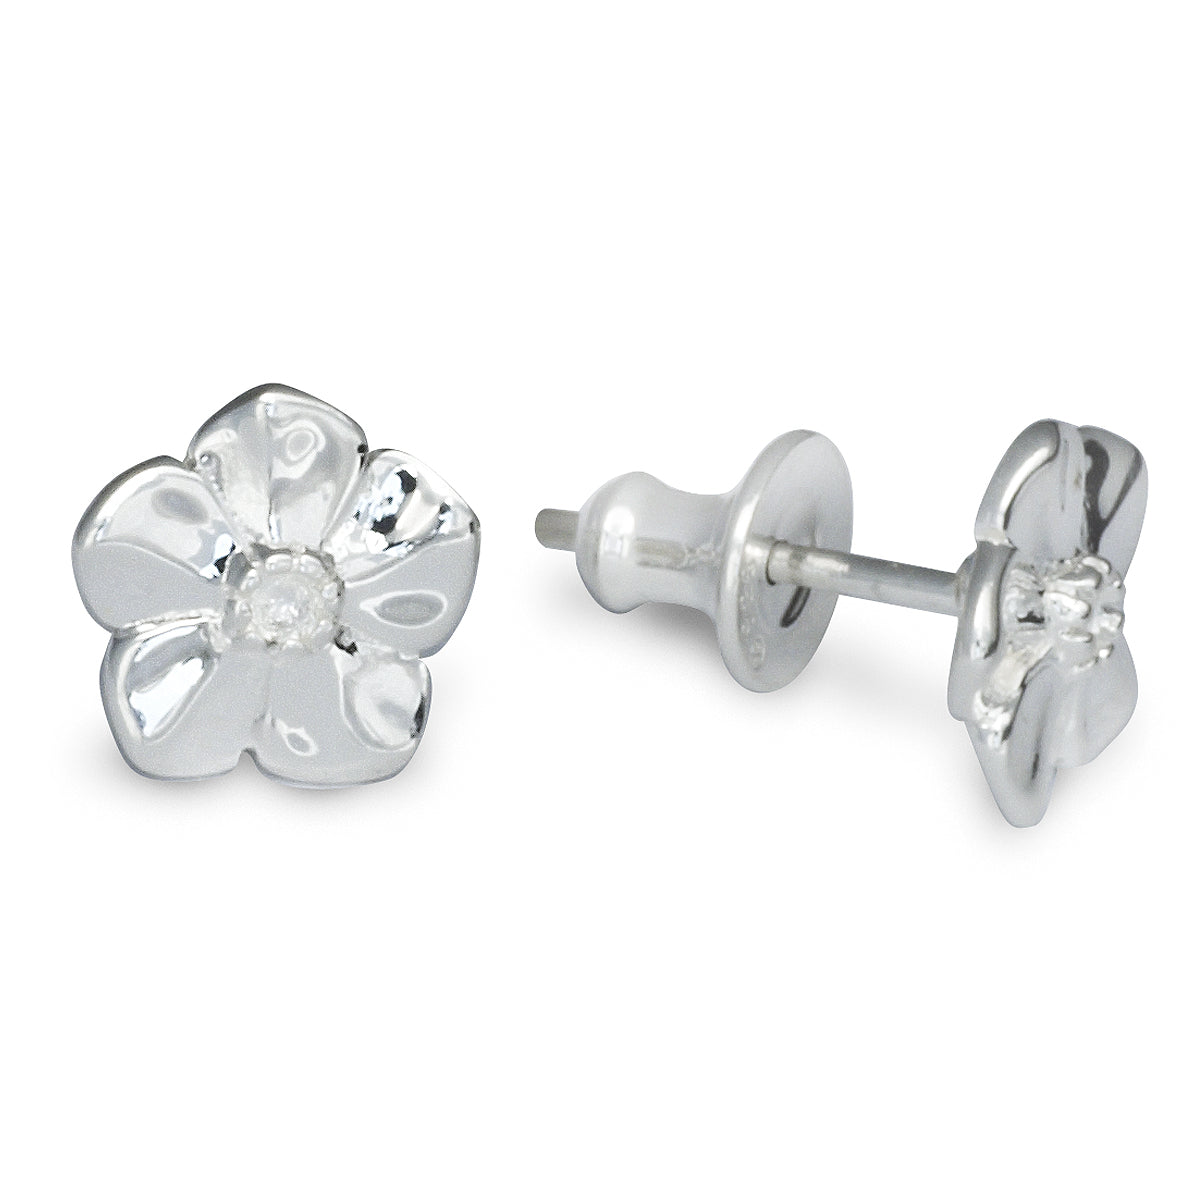 Forget-Me-Not Silver Stud Earrings gift for remembrance and loss from Scarlett Jewellery